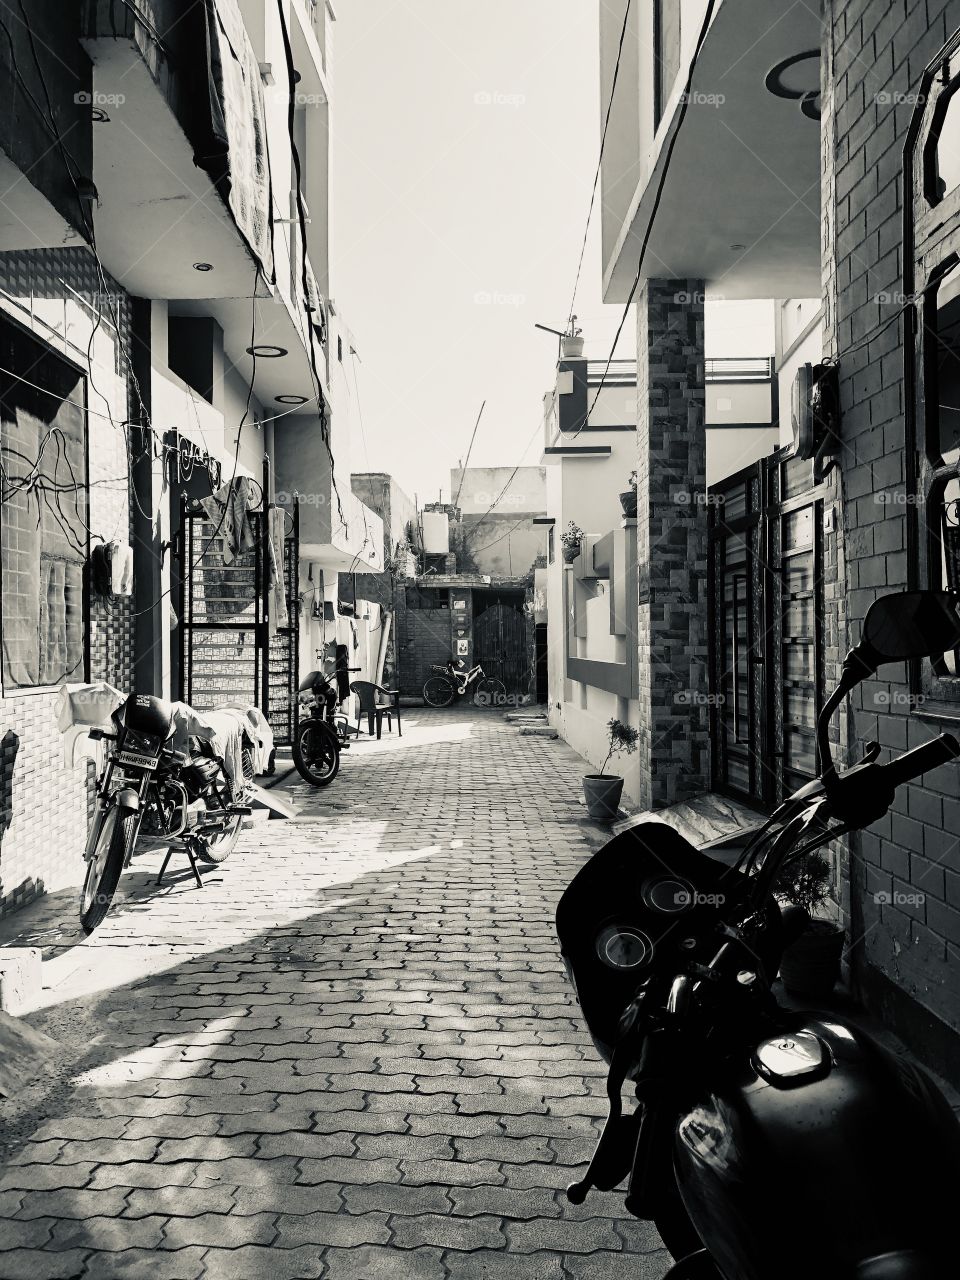 STREETS OF INDIA 🇮🇳